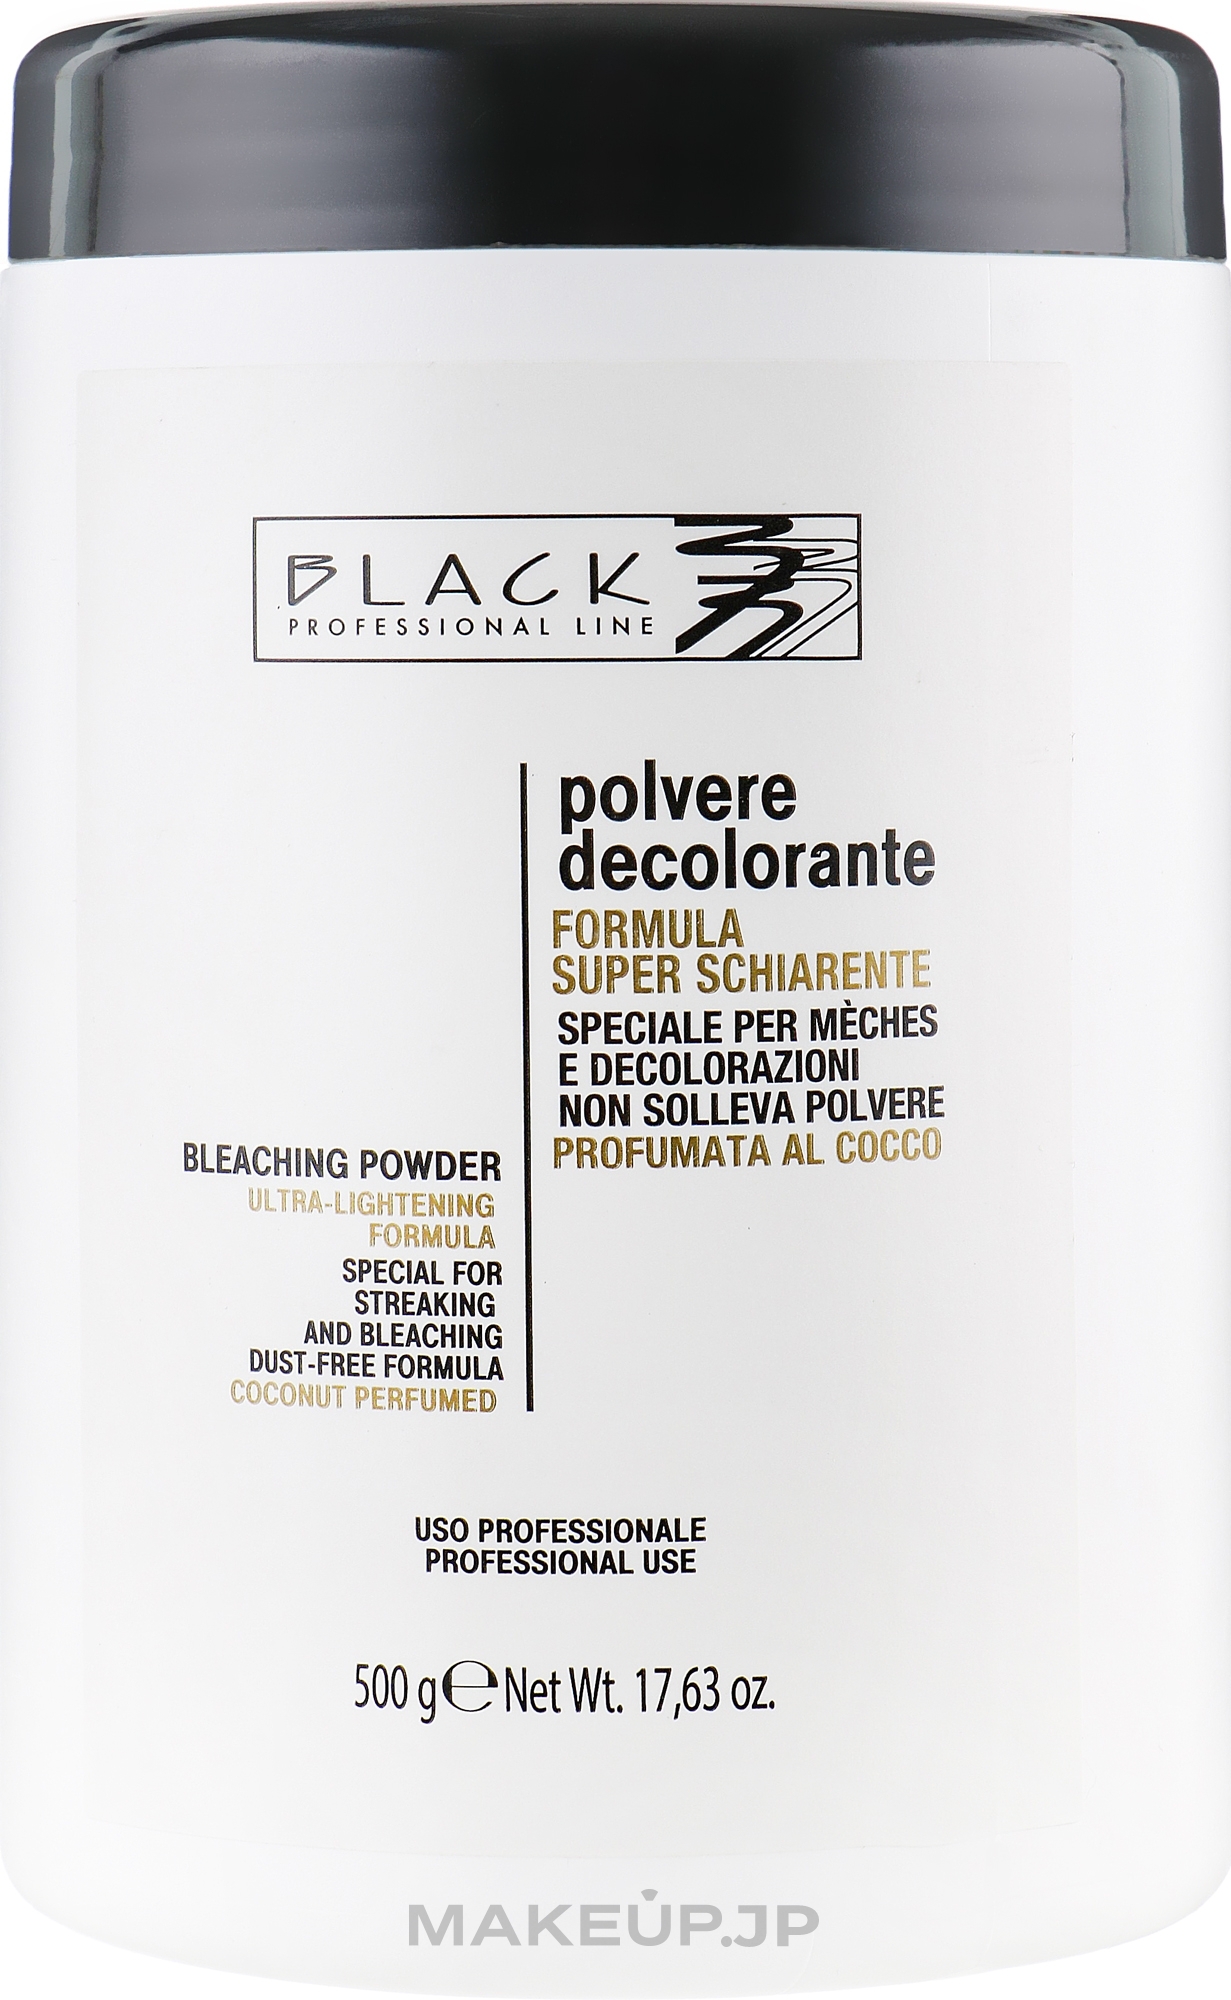 White Bleaching Powder with Coconut Scent - Black Professional Line White Coconut No Dust Bleaching Powder — photo 500 g